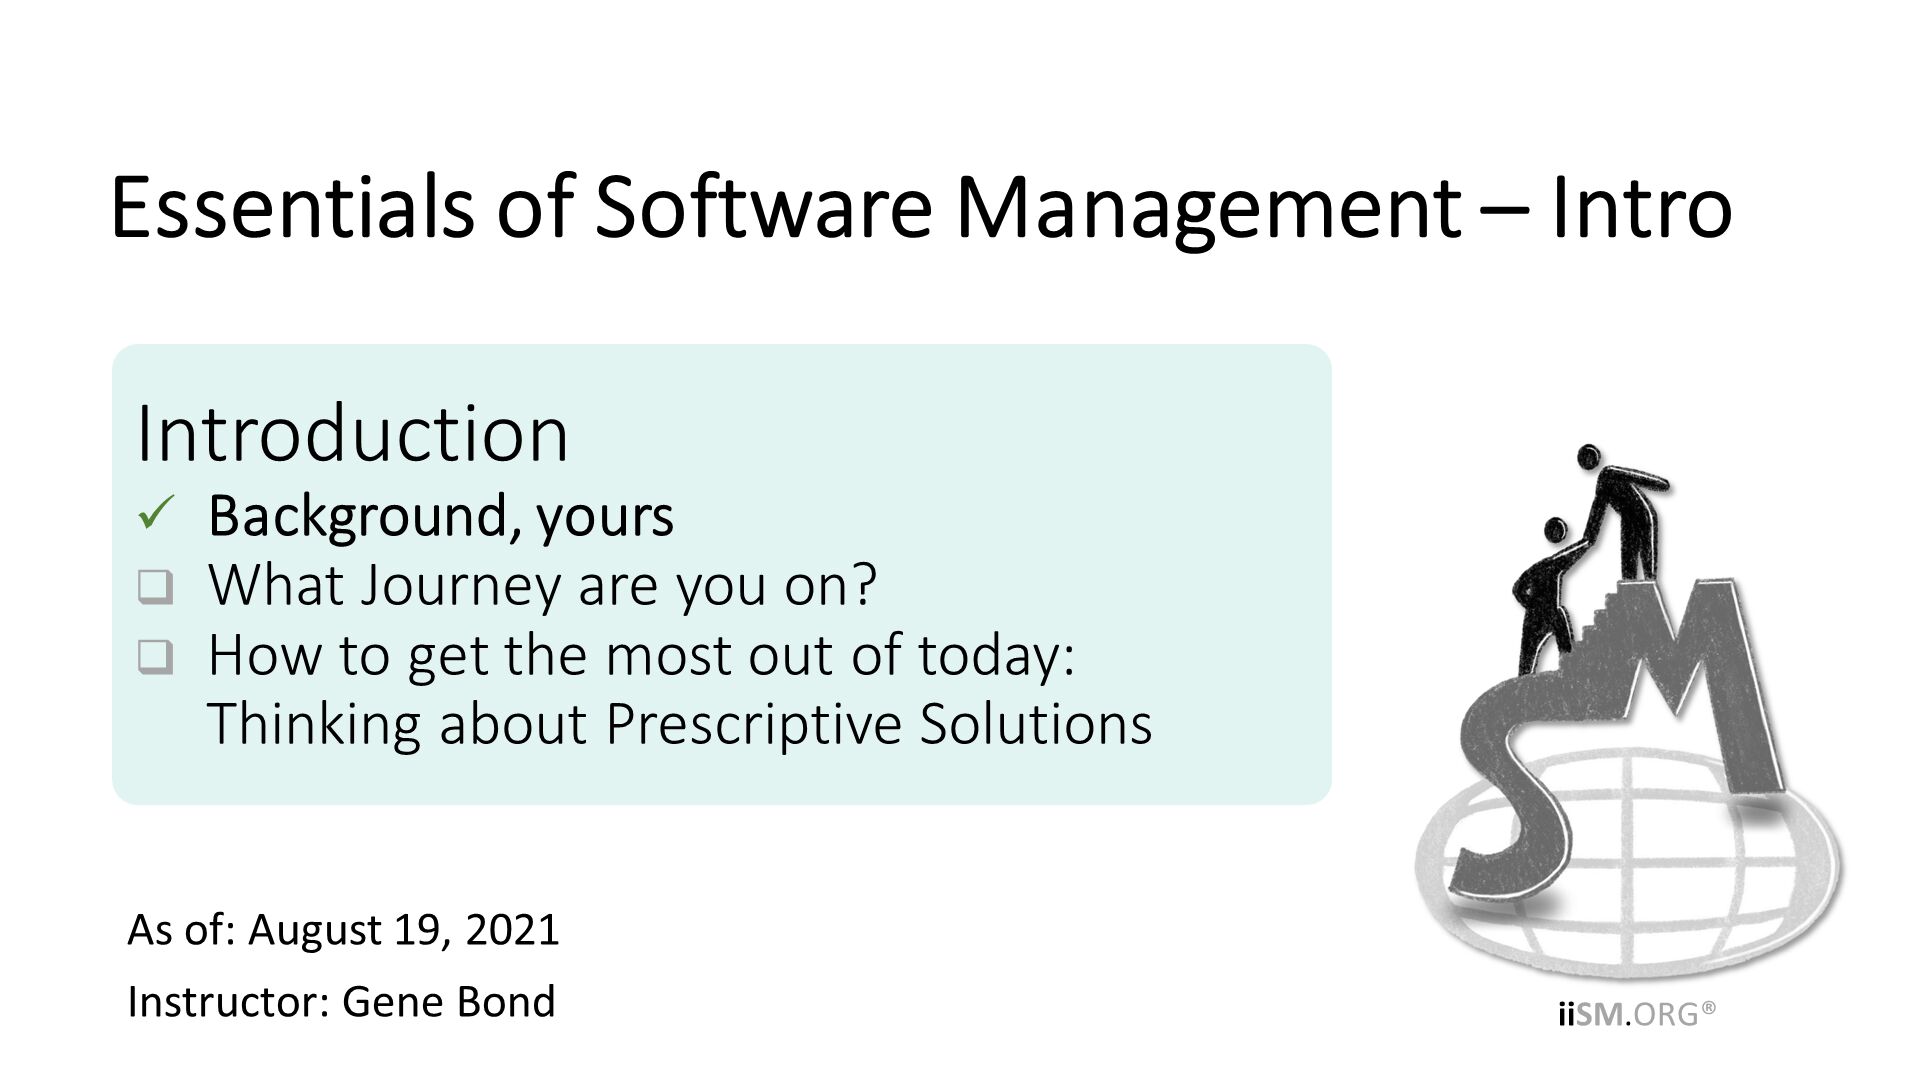 As of: August 19, 2021
Instructor: Gene Bond
. Introduction
Background, yours
What Journey are you on?
How to get the most out of today:Thinking about Prescriptive Solutions. Essentials of Software Management – Intro. 